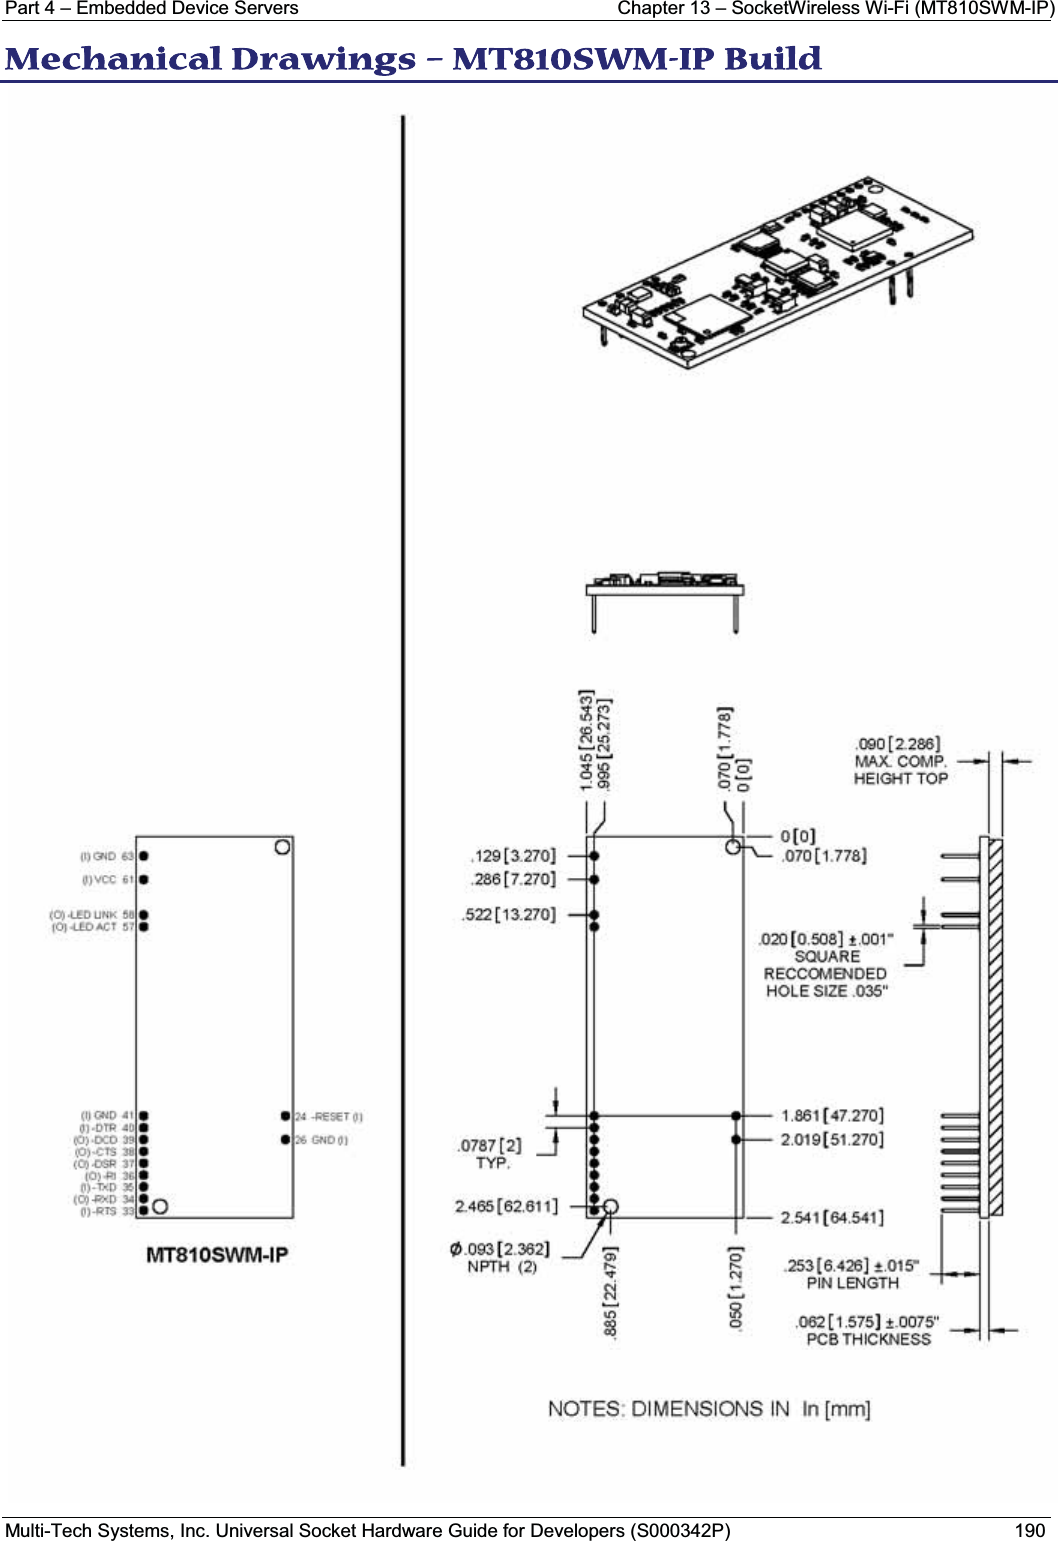 Part 4 – Embedded Device Servers Chapter 13 – SocketWireless Wi-Fi (MT810SWM-IP)Multi-Tech Systems, Inc. Universal Socket Hardware Guide for Developers (S000342P) 190MMechanical Drawings – MT810SWM-IP Build 